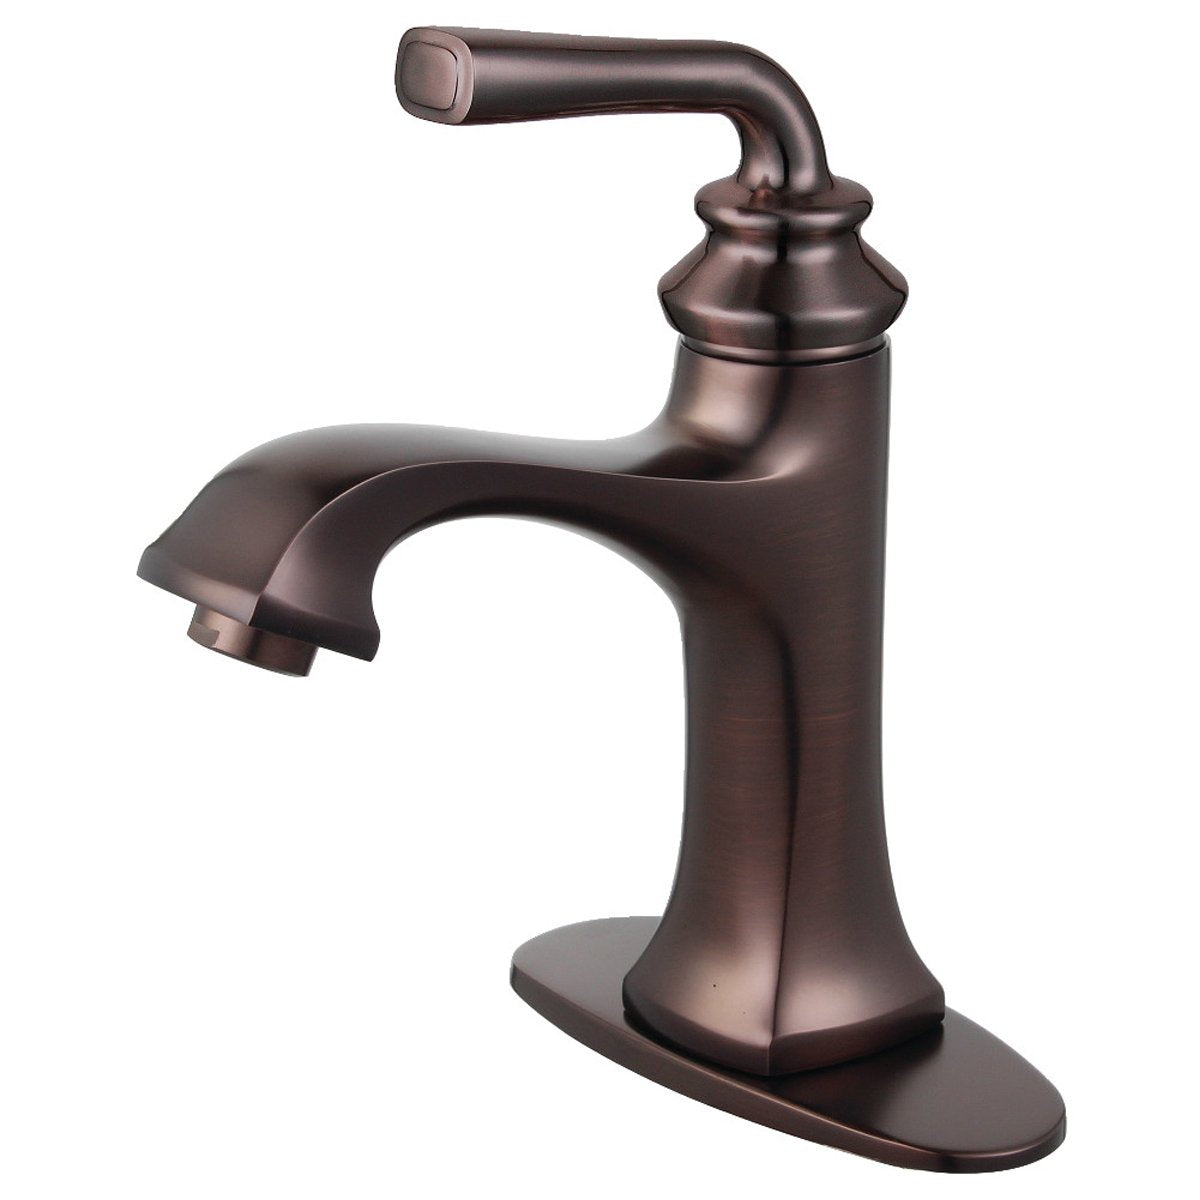 Kingston Brass Fauceture Restoration Single-Handle Bathroom Faucet with Push-Up Drain and Deck Plate